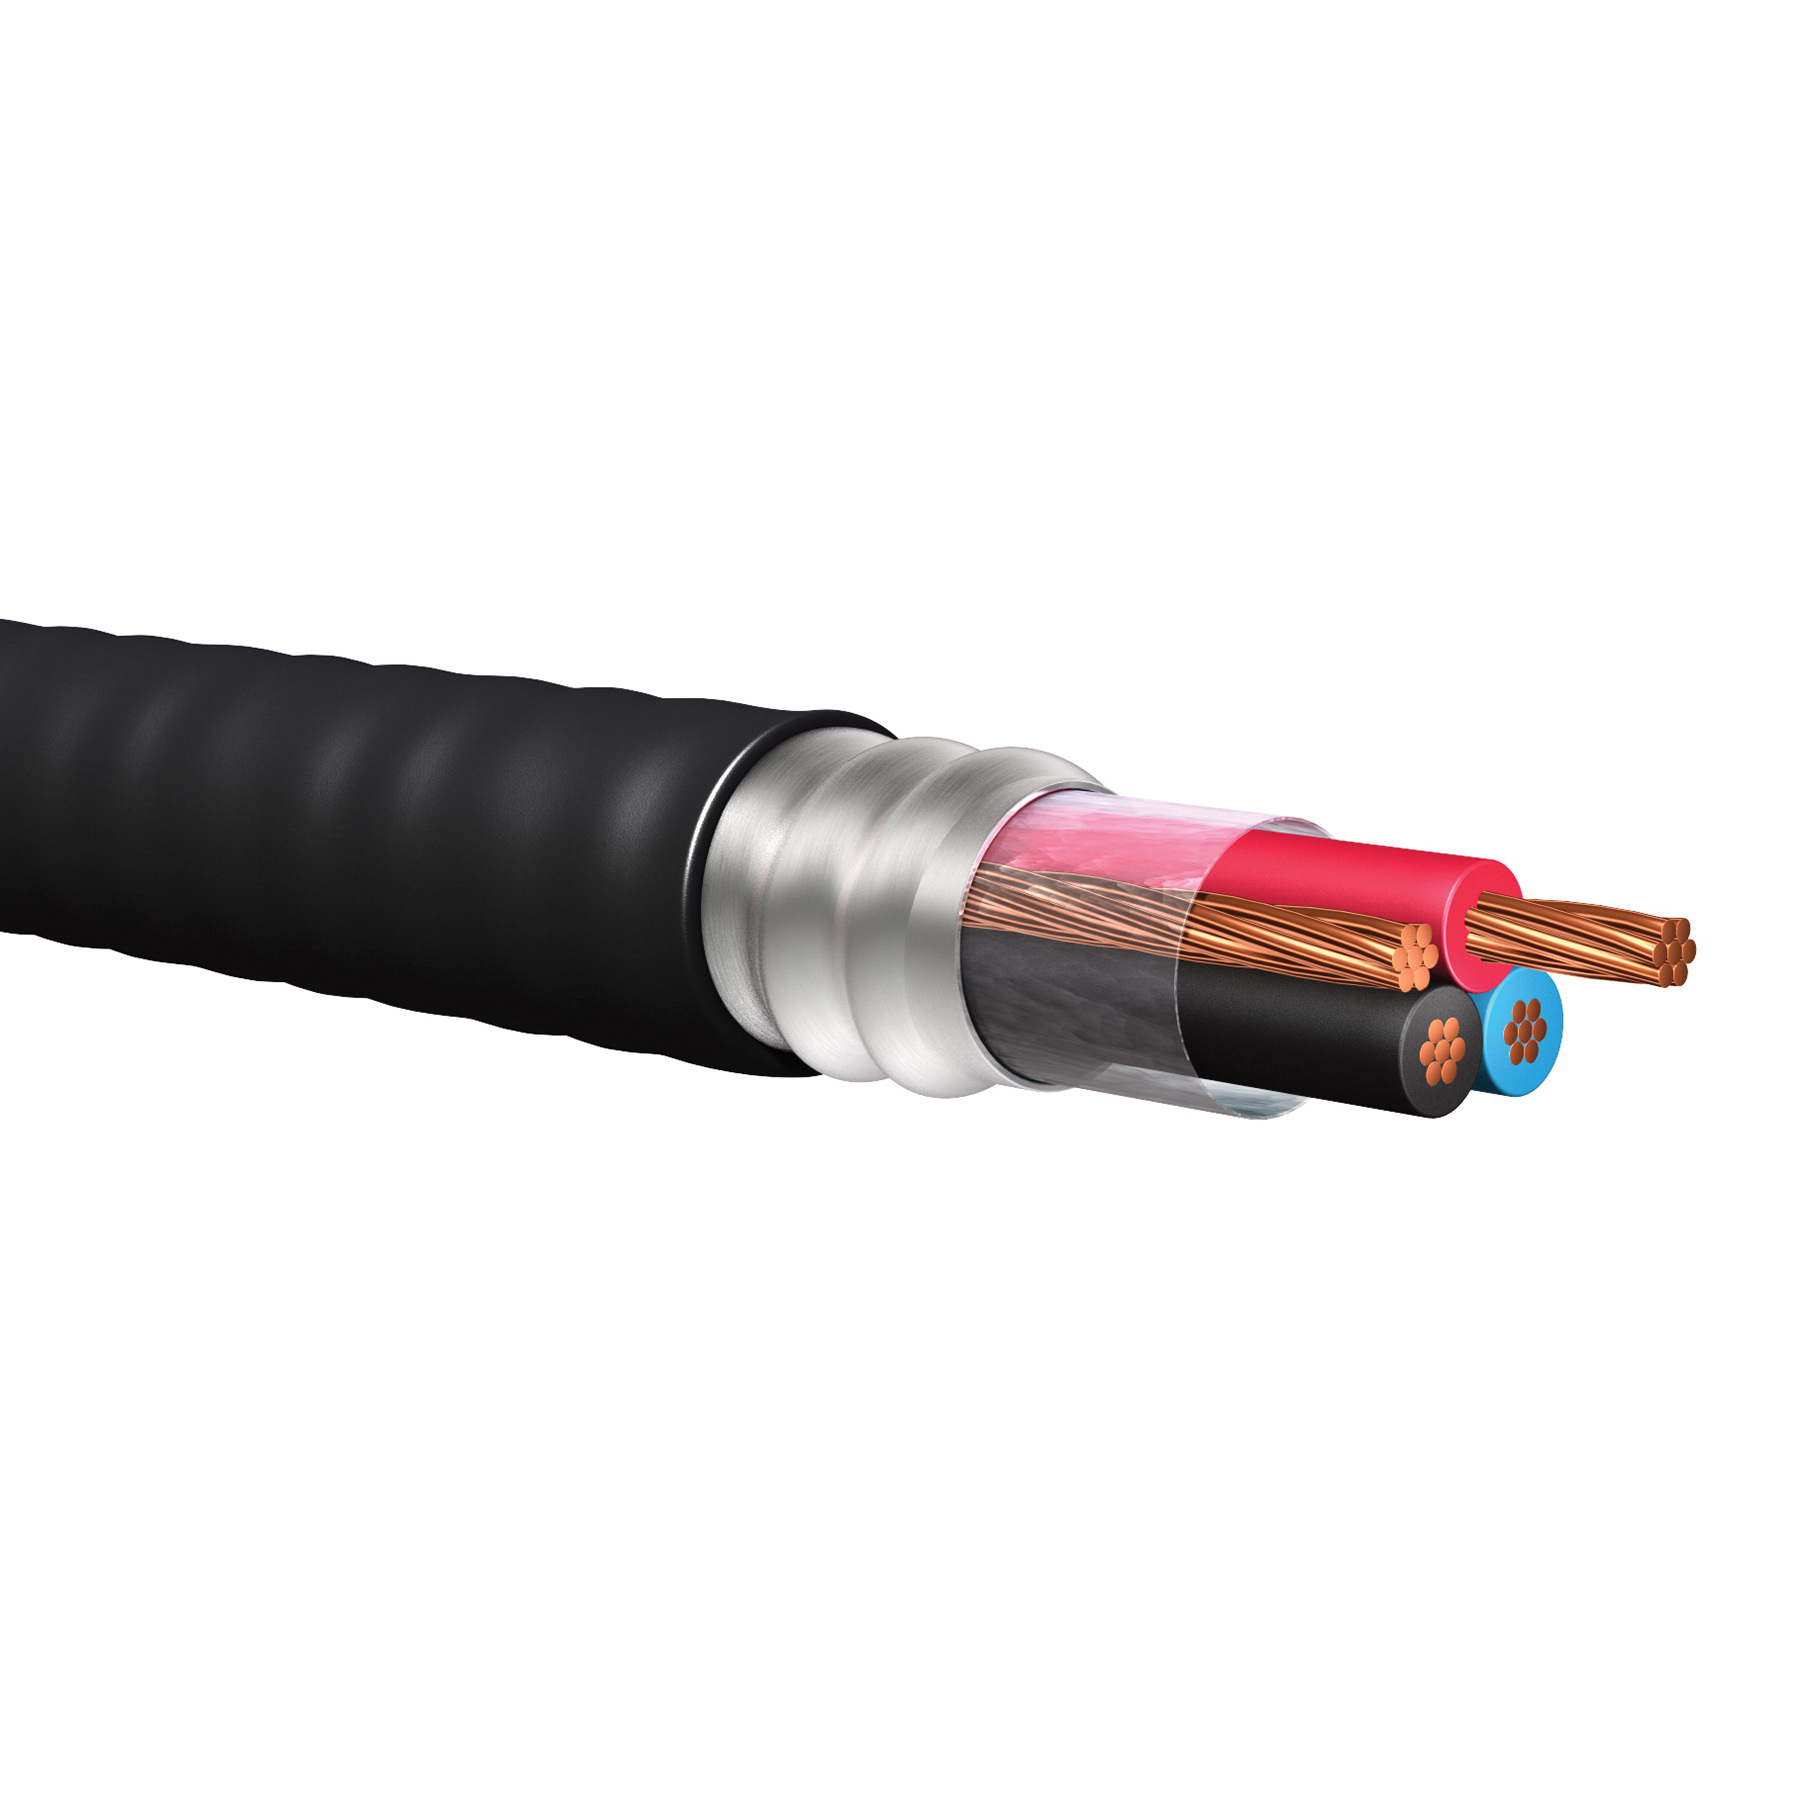 
                UL-Zertifikat Teck Mc-HL Cable 600V Armoured Power Cable 14/3
            